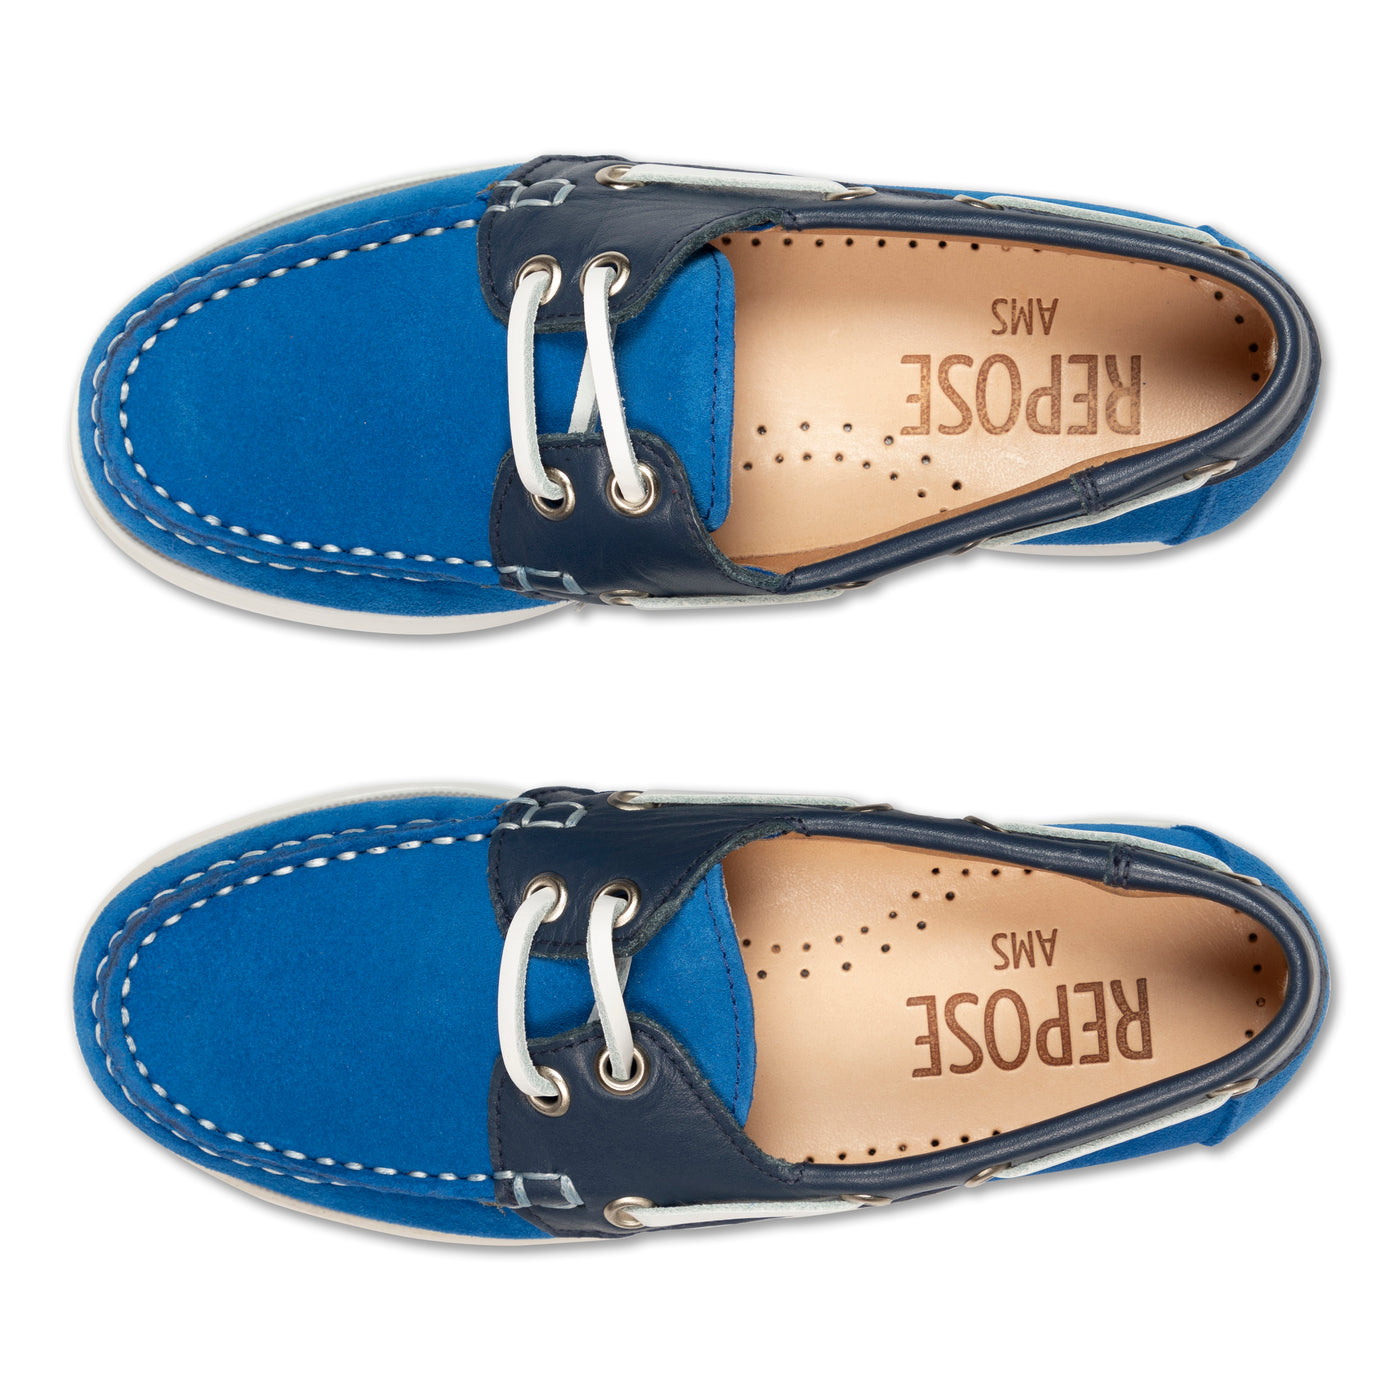 boat shoes - bright night blue color block